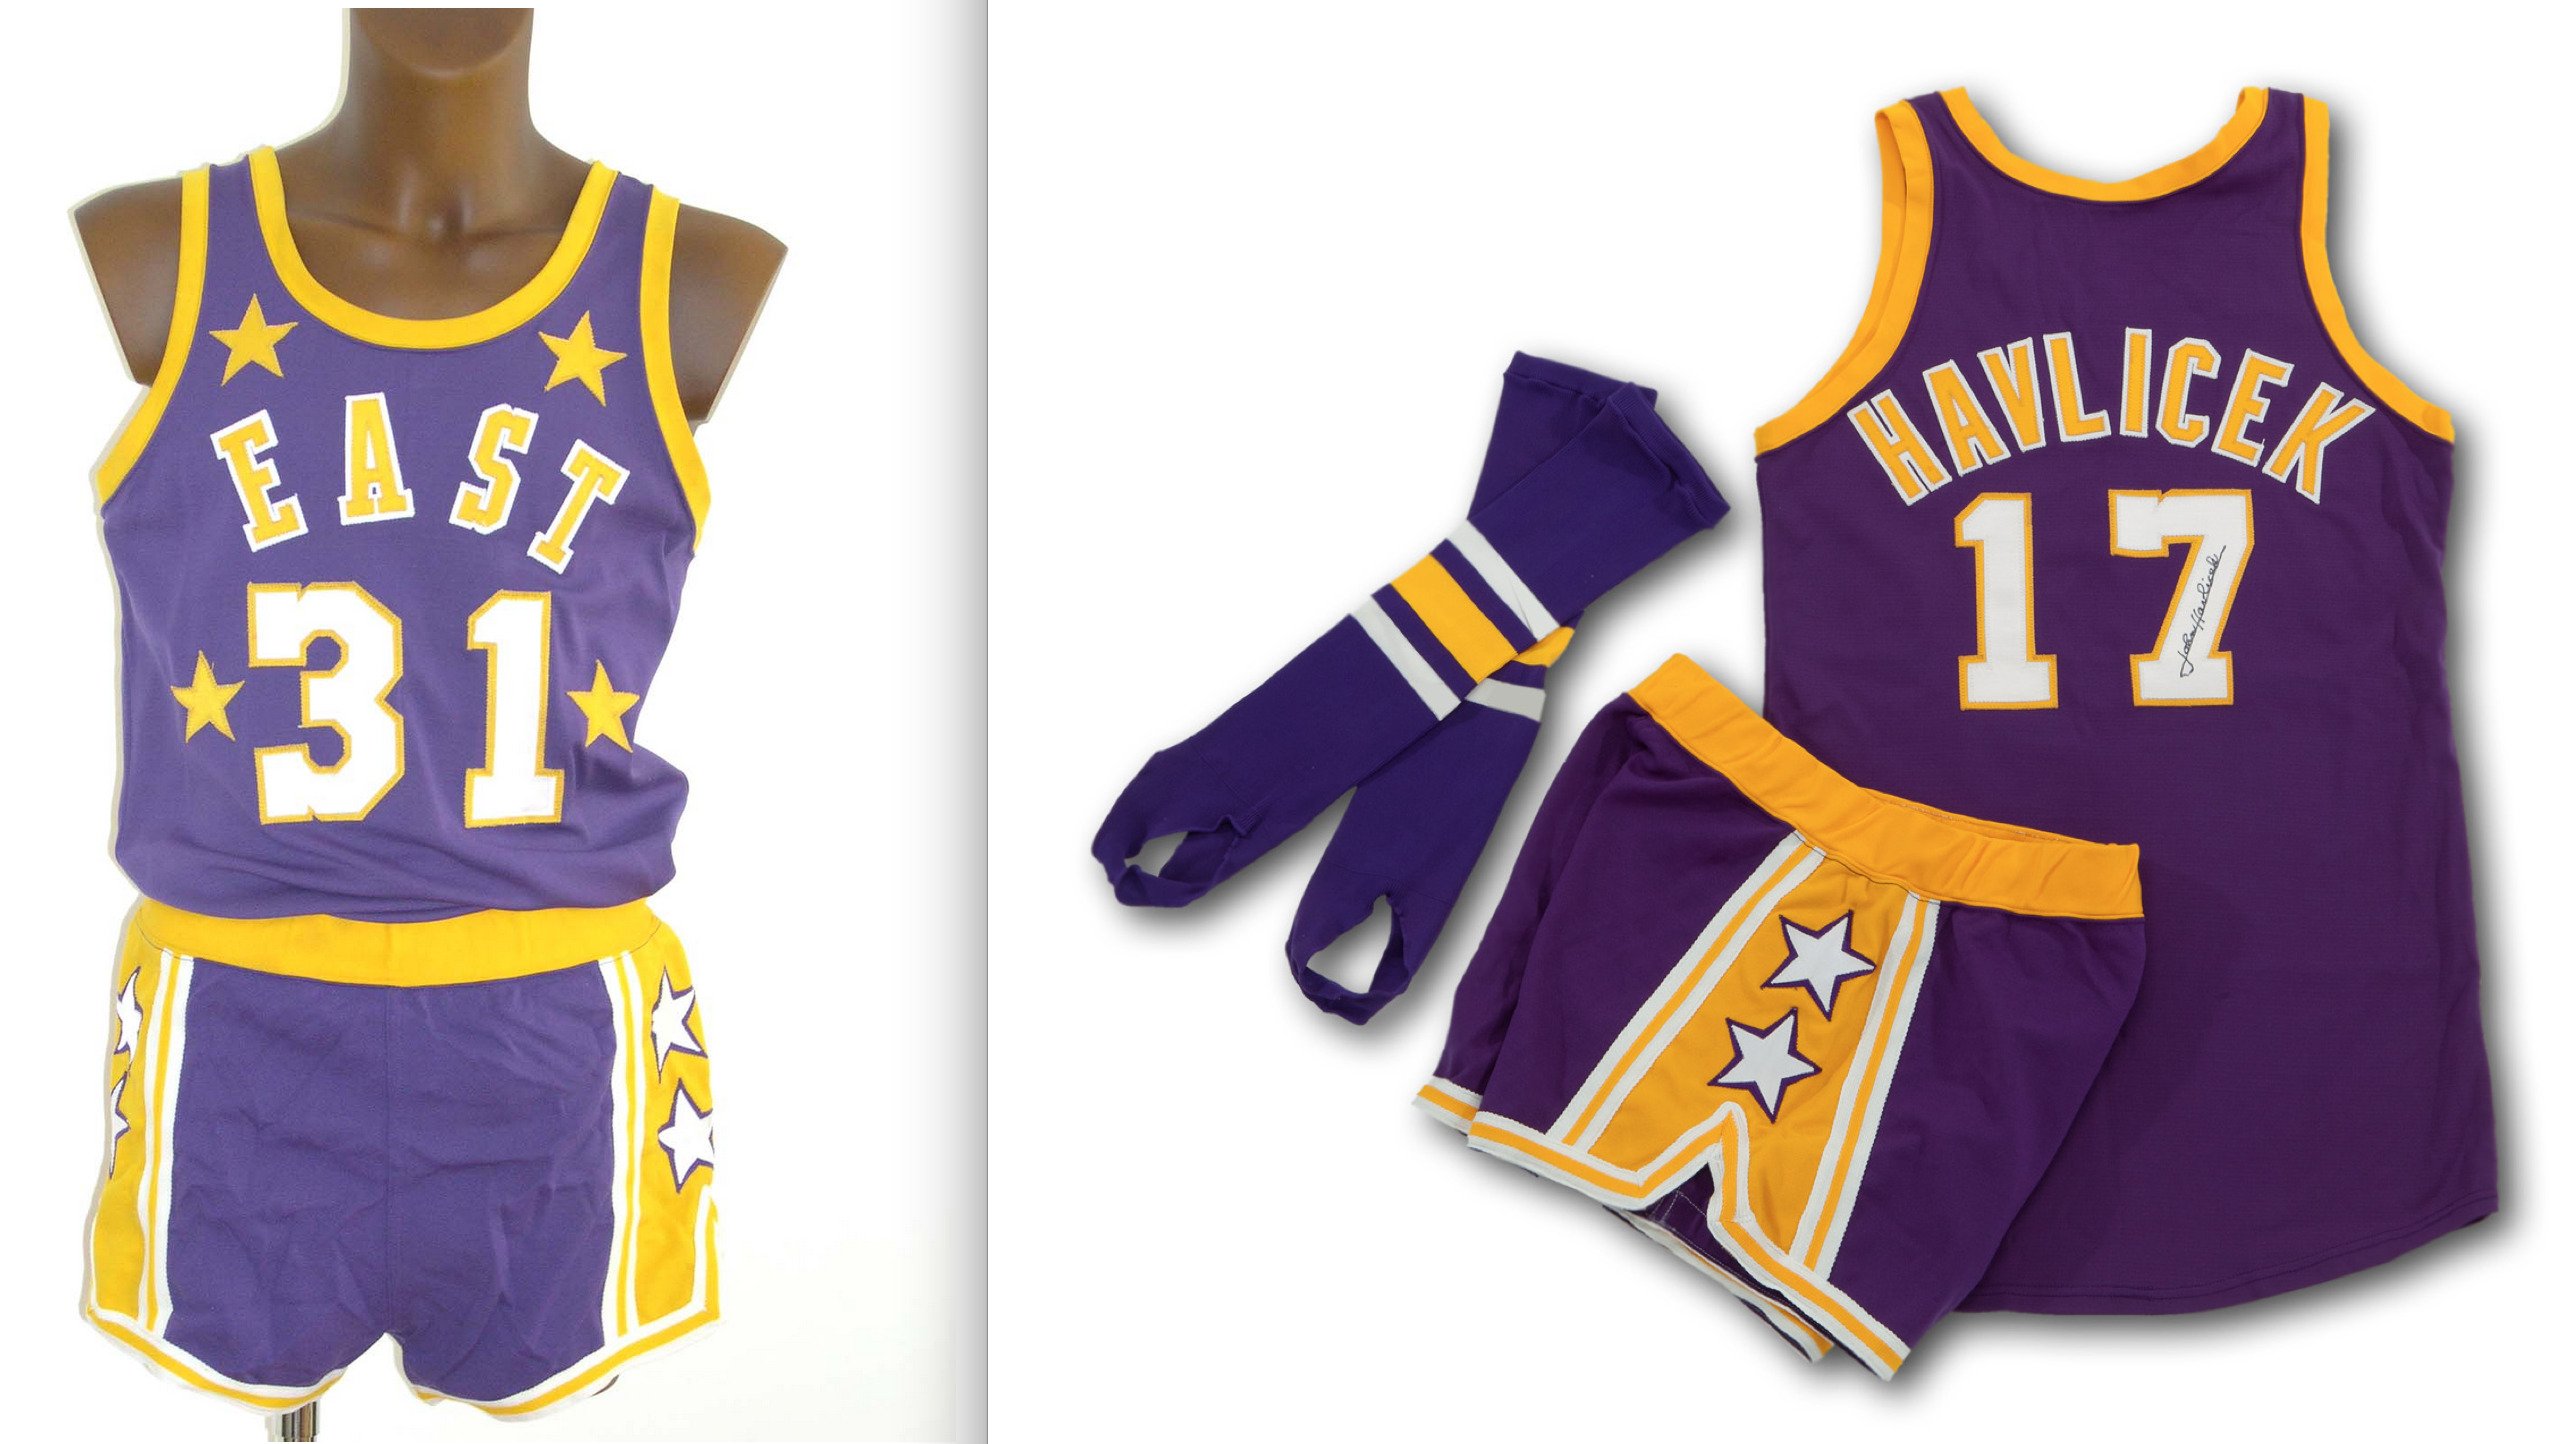 Paul Lukas on X: Great look at uniforms from the 1972 NBA All